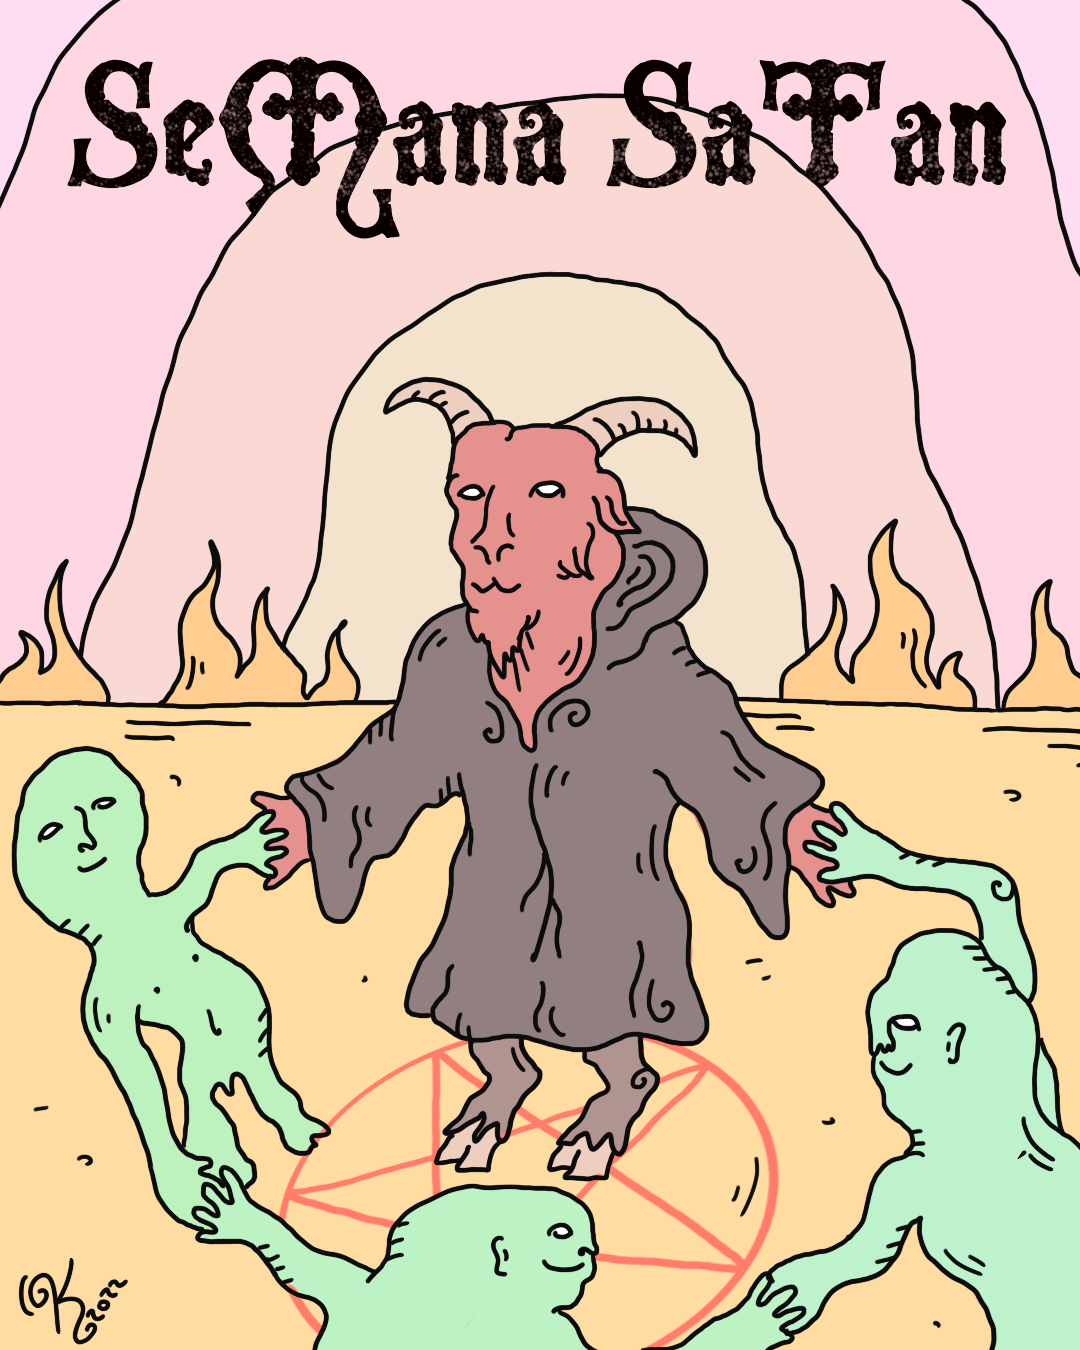 Cartoon style satan and green aliens in hell with lettering 